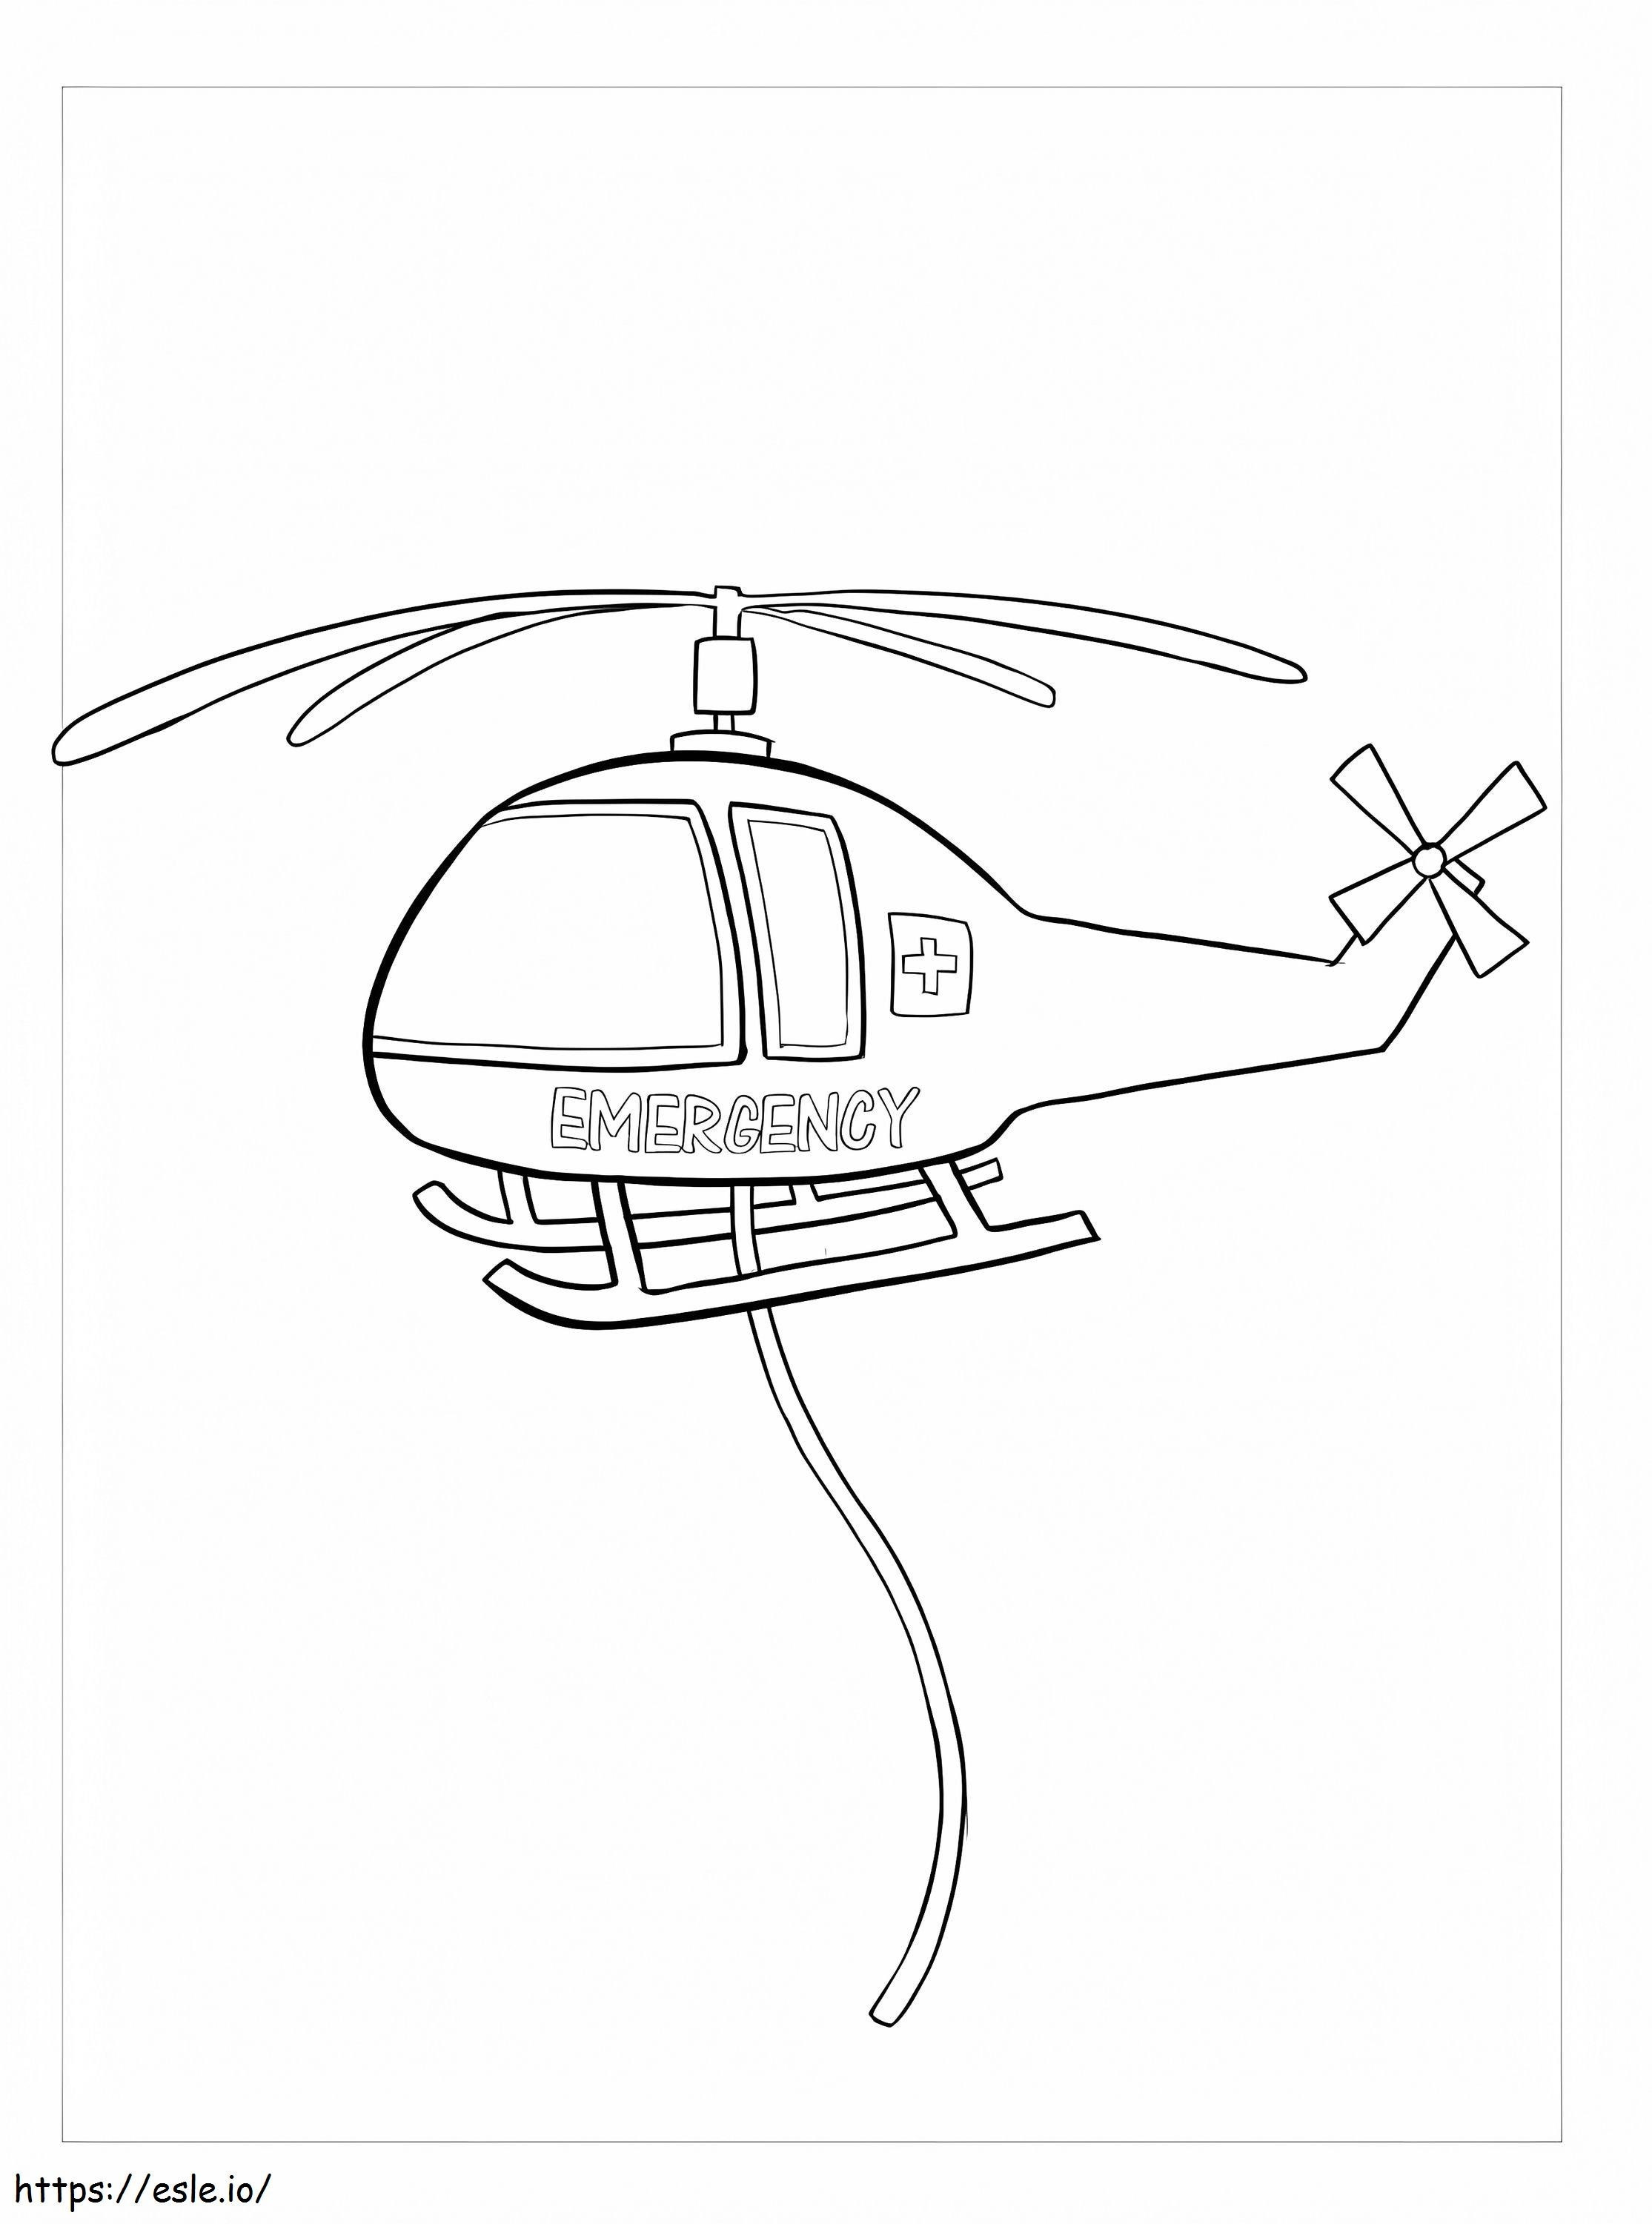 Simple Helicopter coloring page